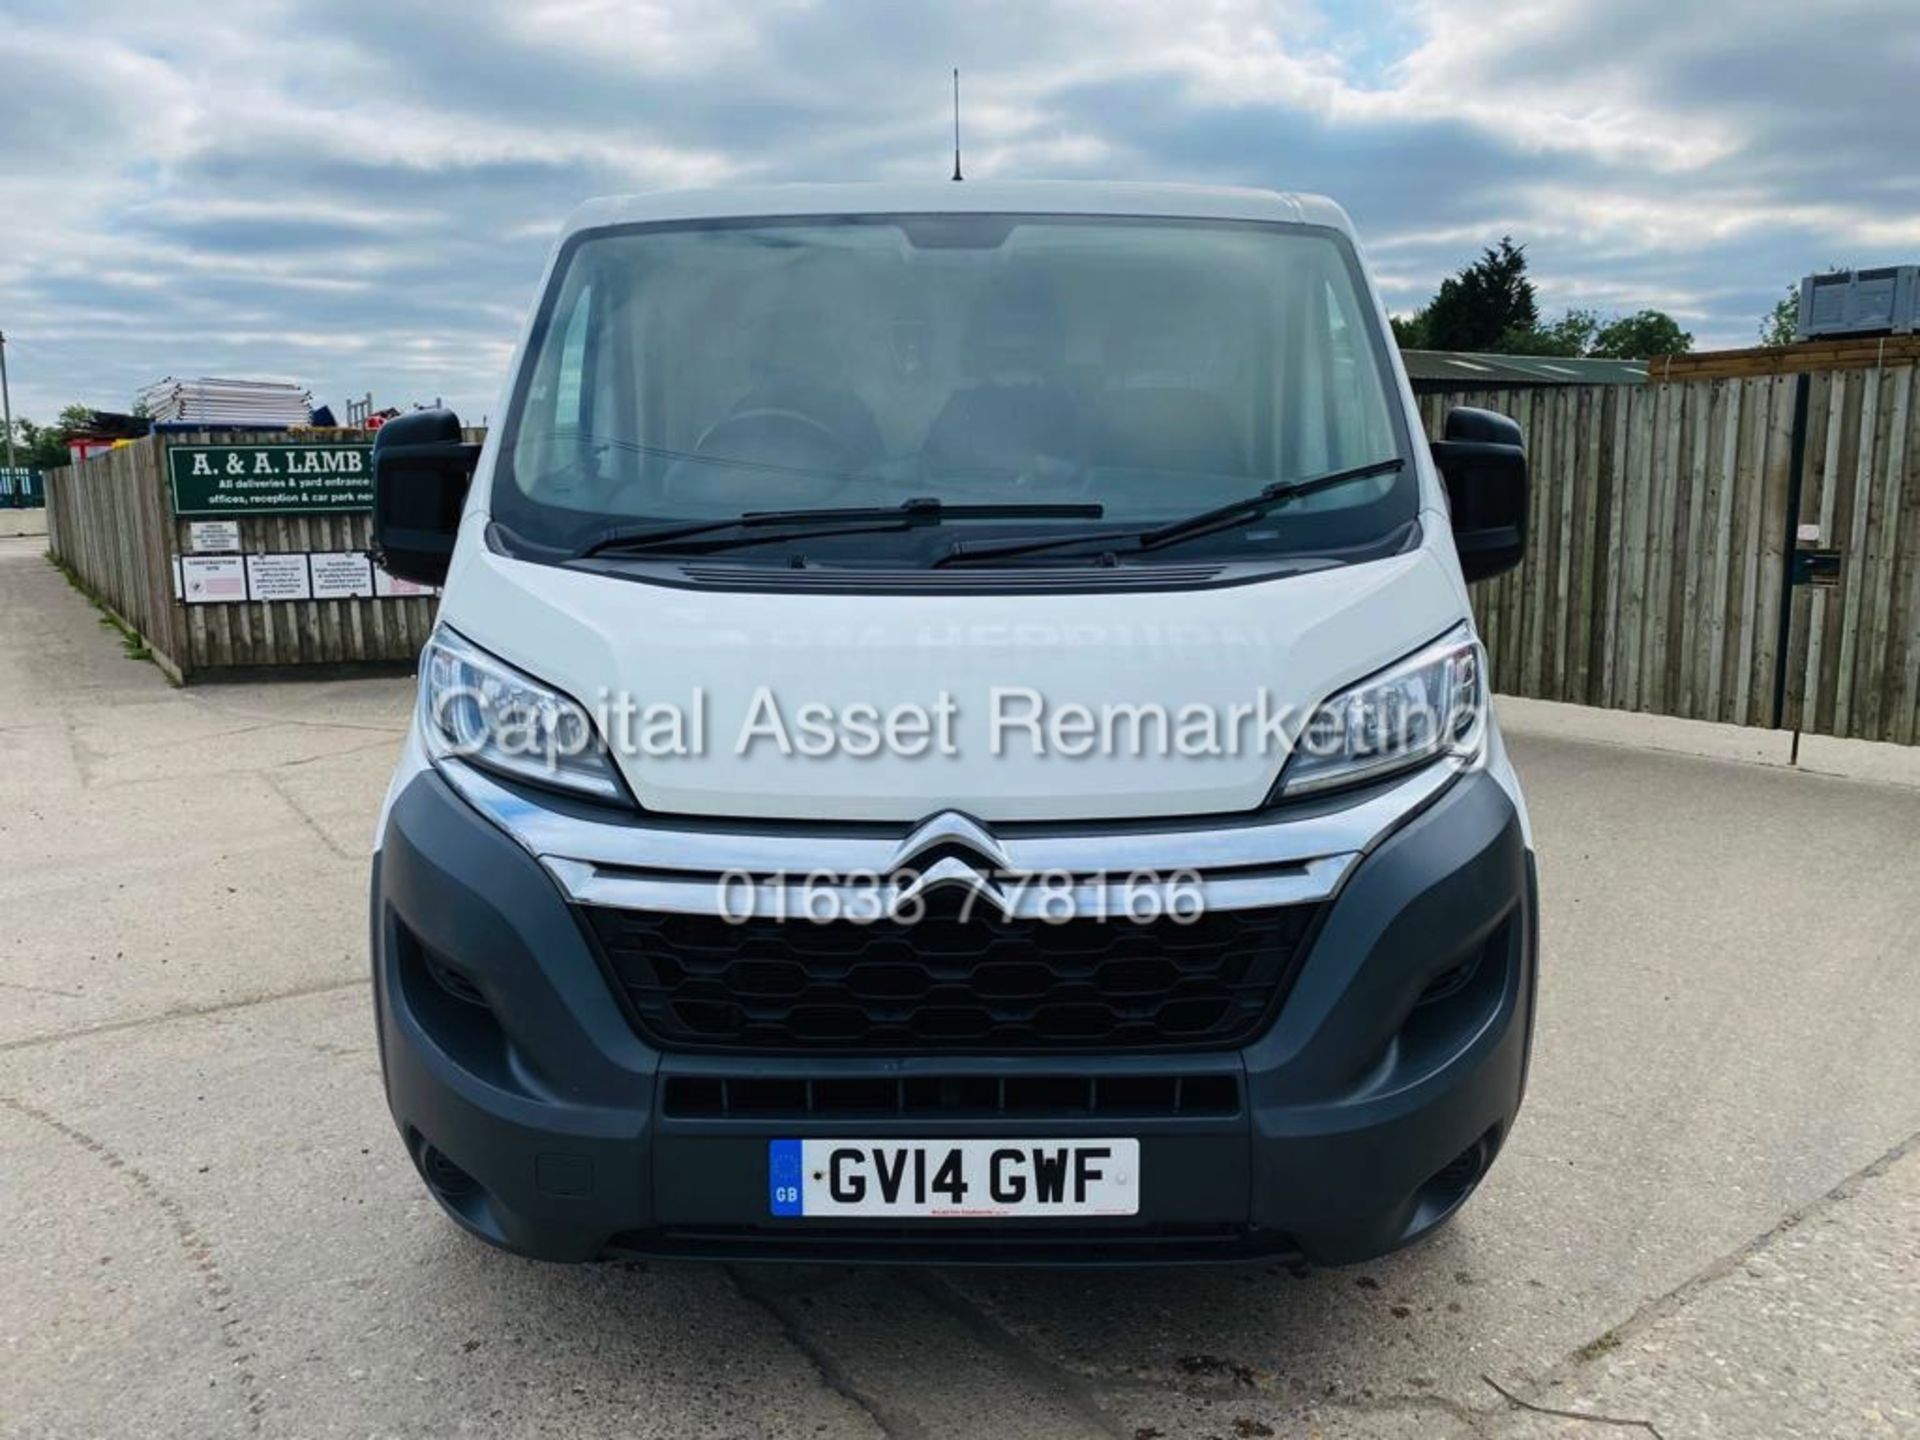 ON SALE CITROEN RELAY 2.2HDI "ENTERPRISE" 1 OWNER - AIR CON - ELEC PACK - CRUISE - PARKING SENSORS - Image 4 of 19